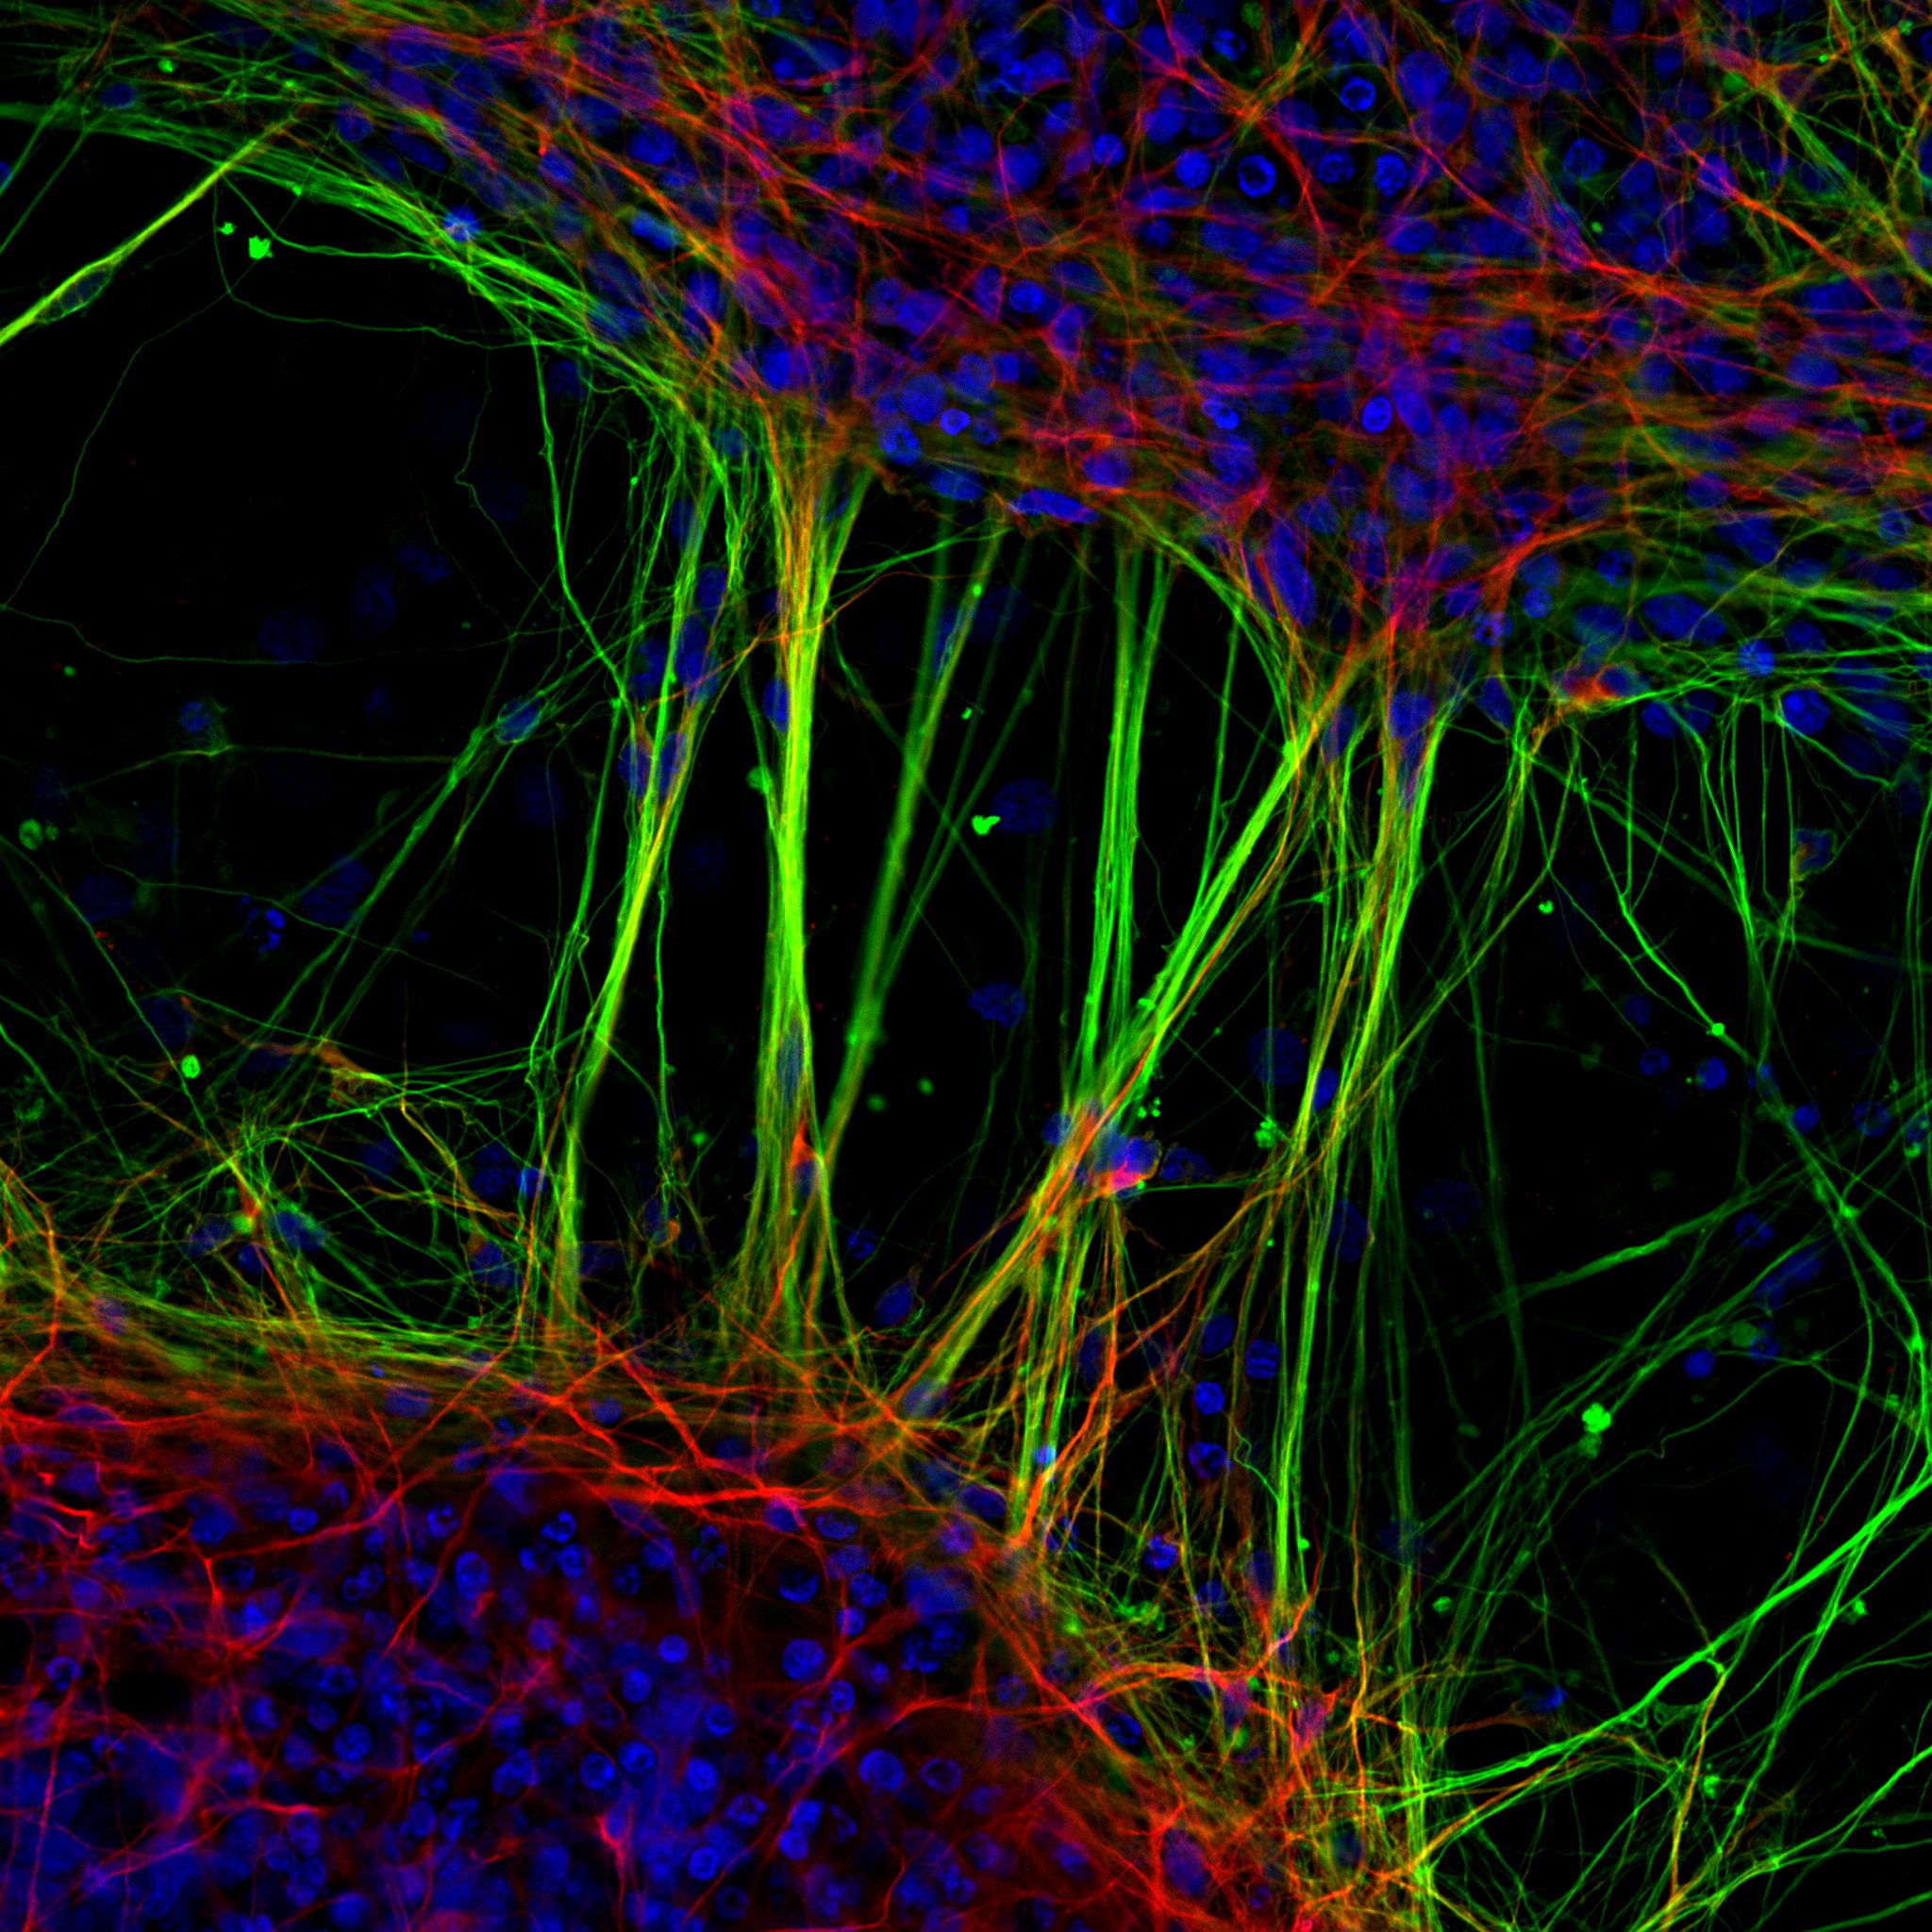 an extremely magnified image of human neurons shown as long thin fluoro green strands linking red web and blue dots